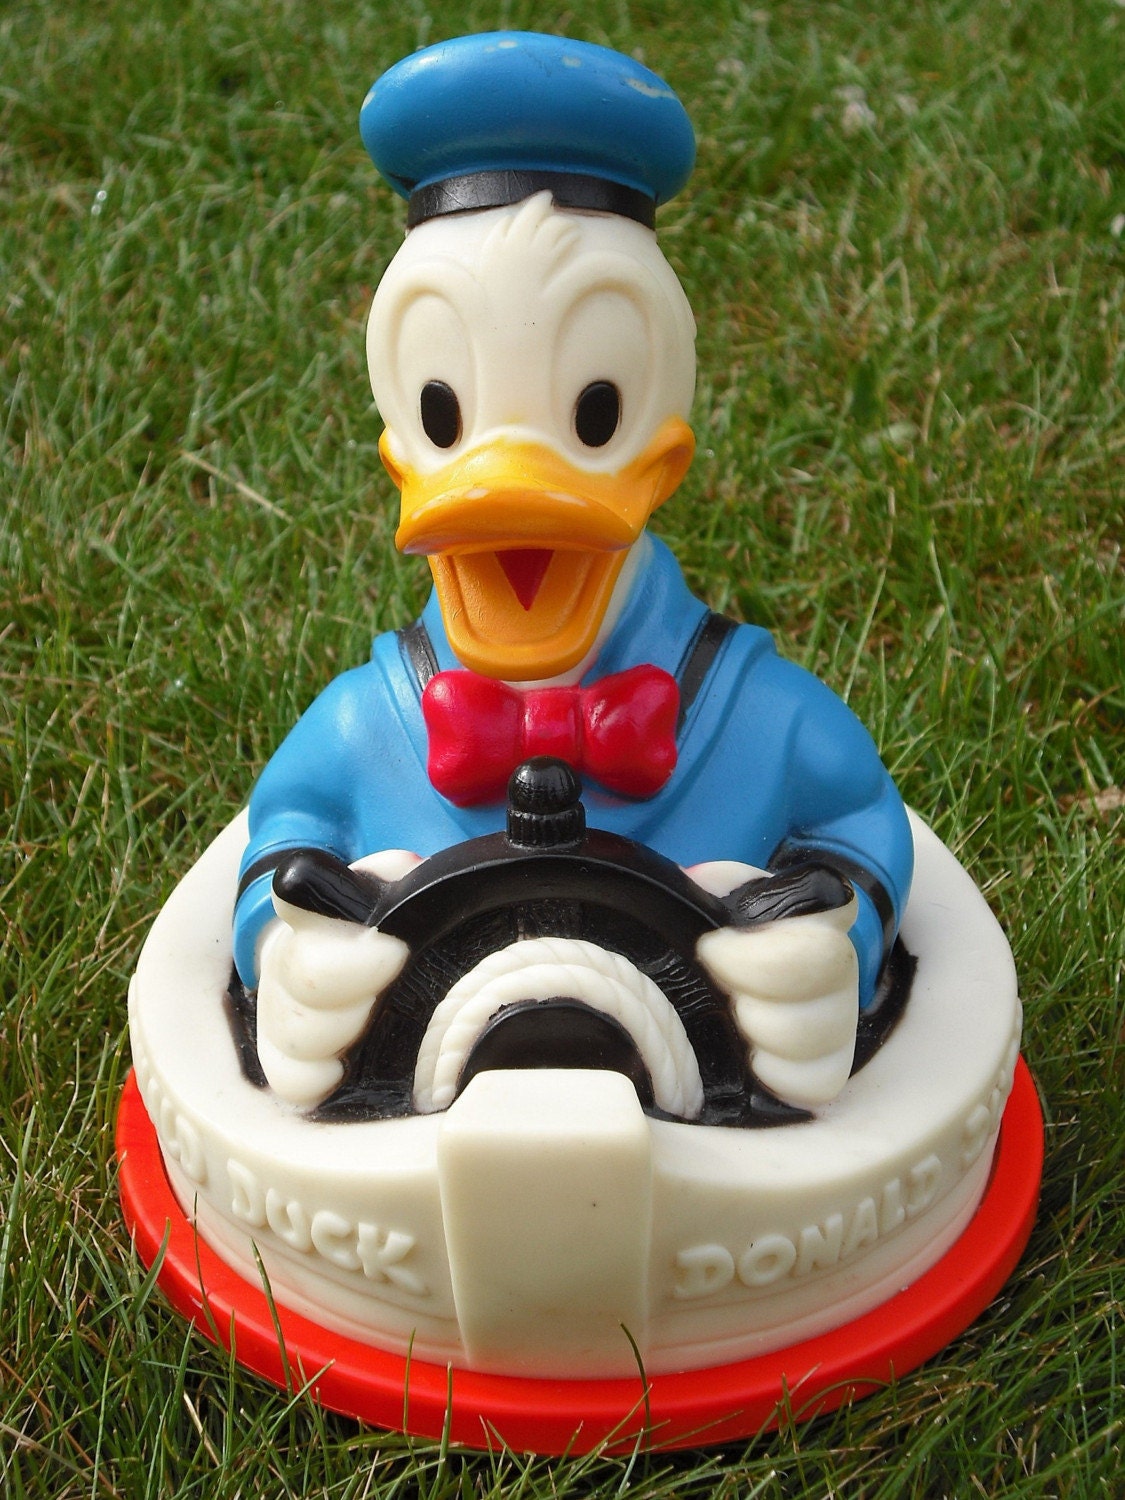 Vintage Donald Duck Wobbly Chime Toy